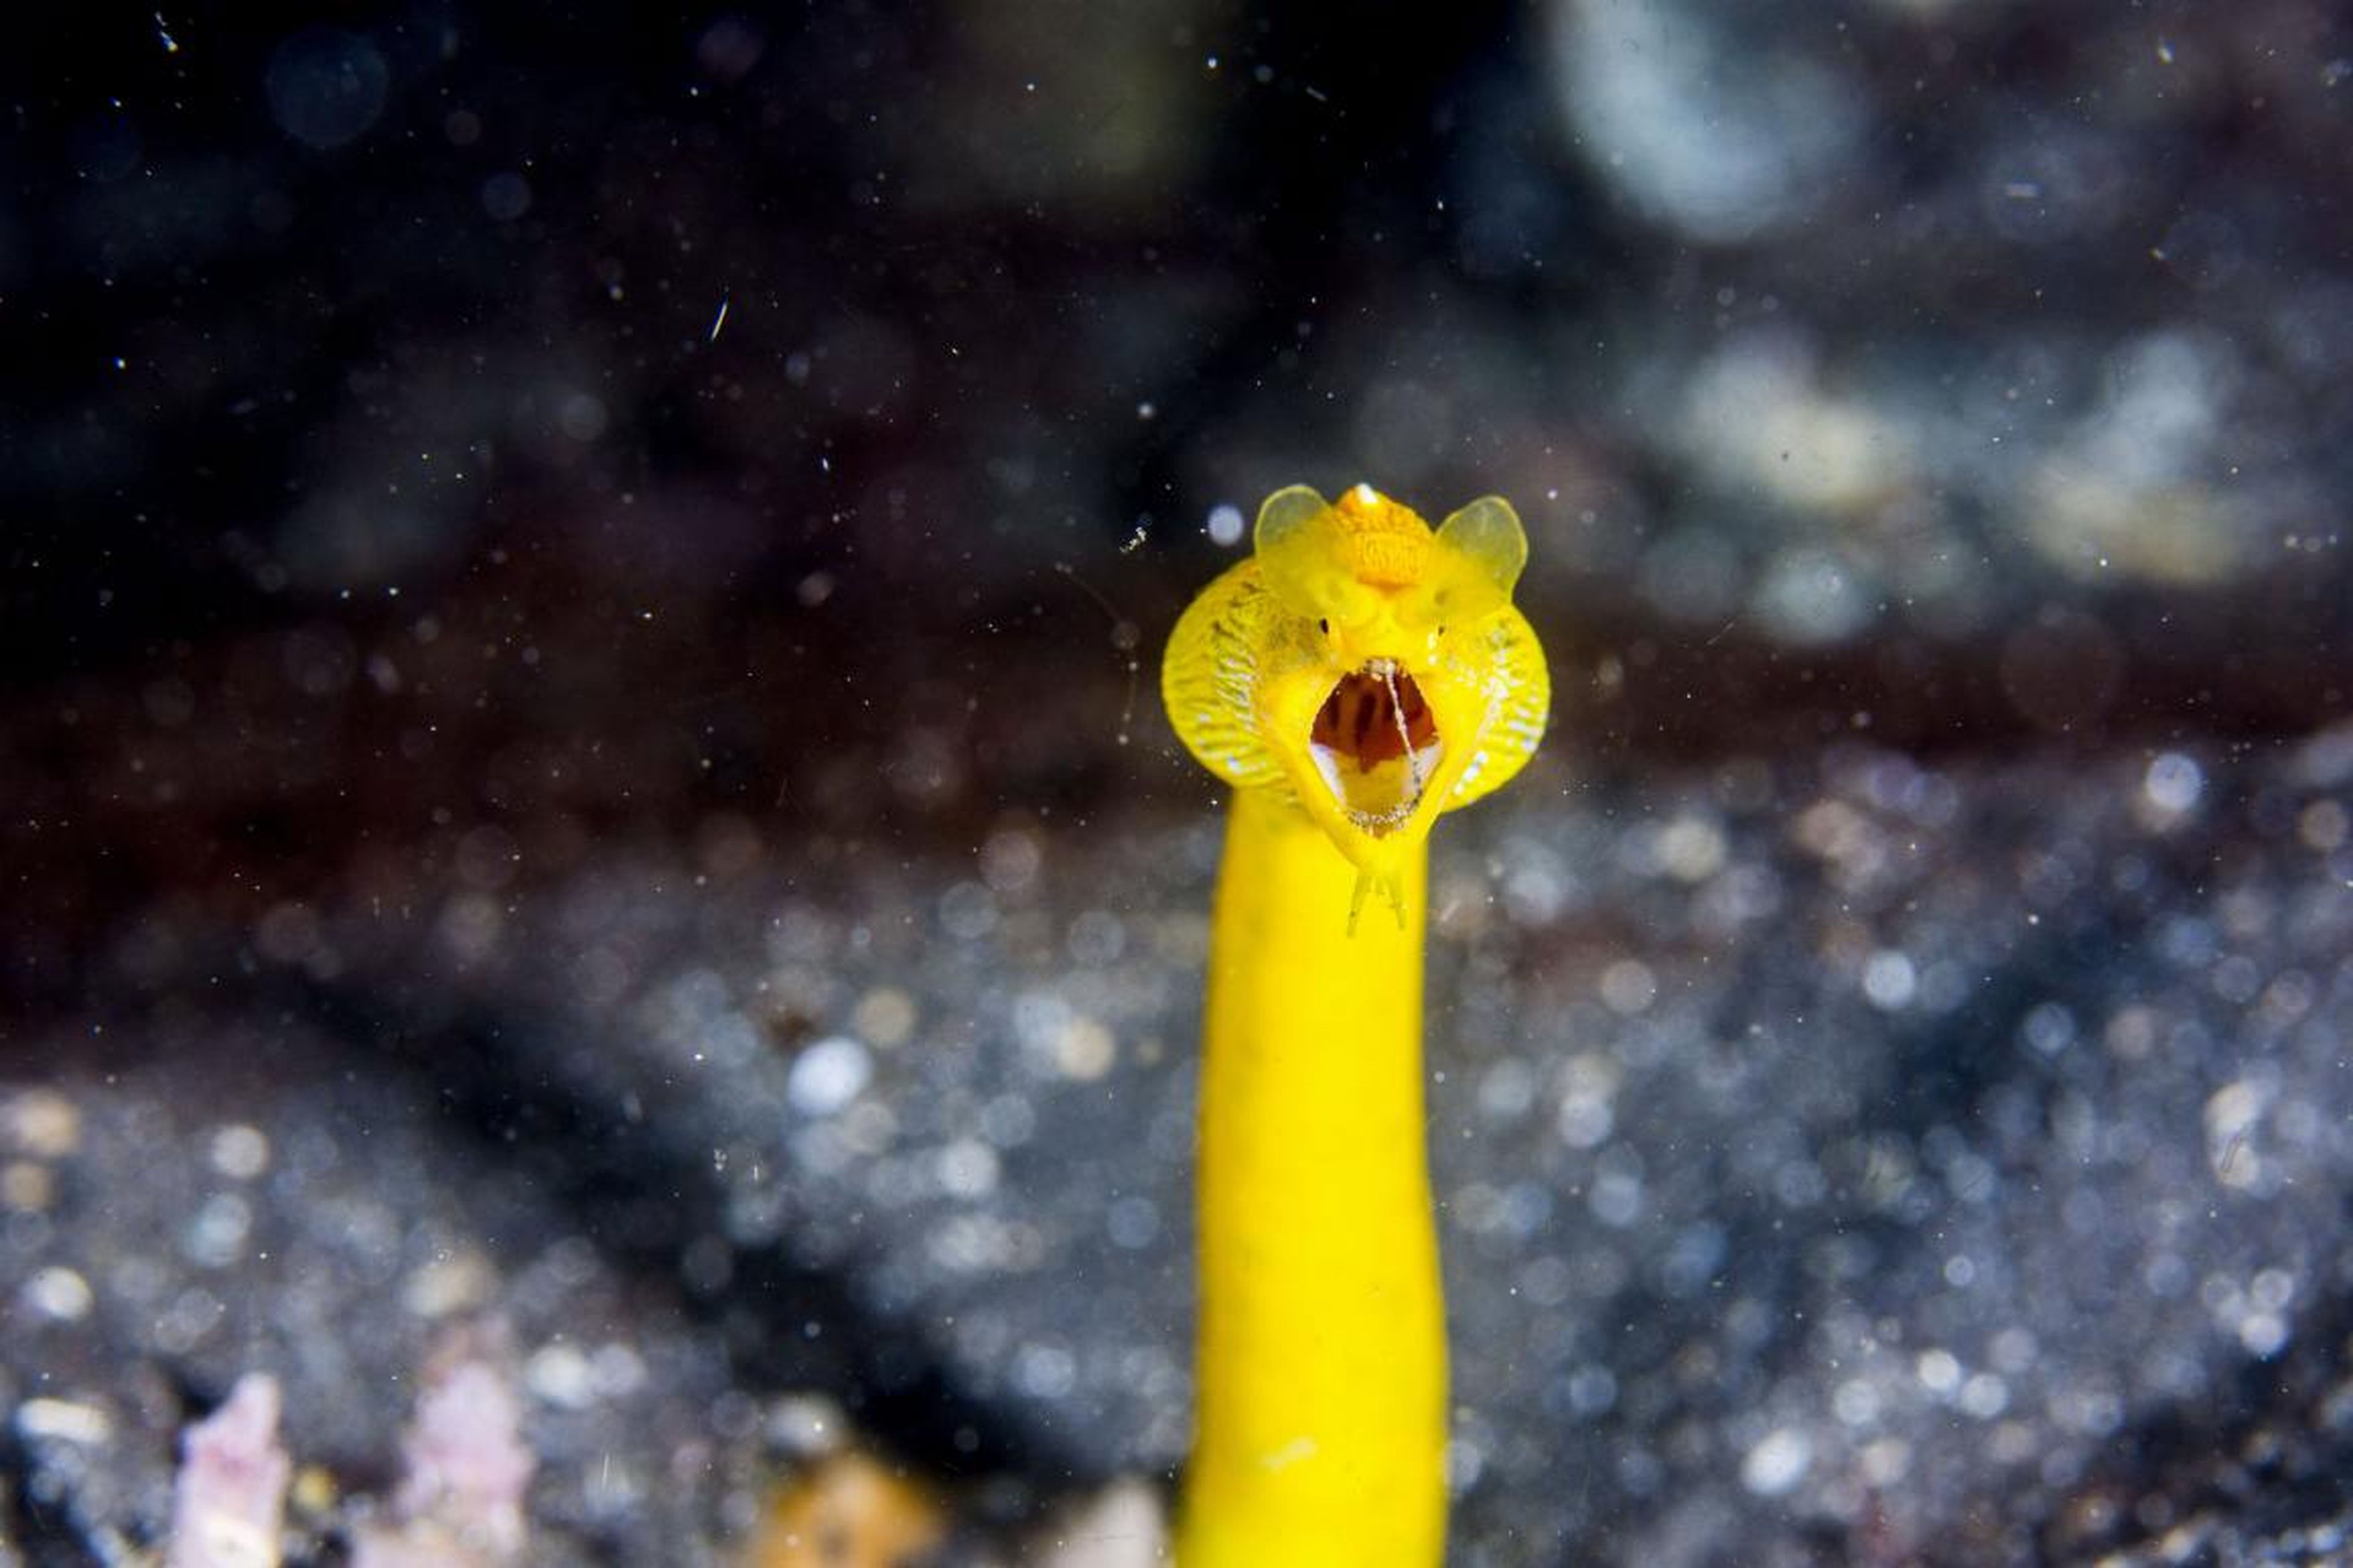 An open-mouthed Ribbon eel in Indonesia, photographed by Rudy Janessen, boasts remarkably bright coloring.